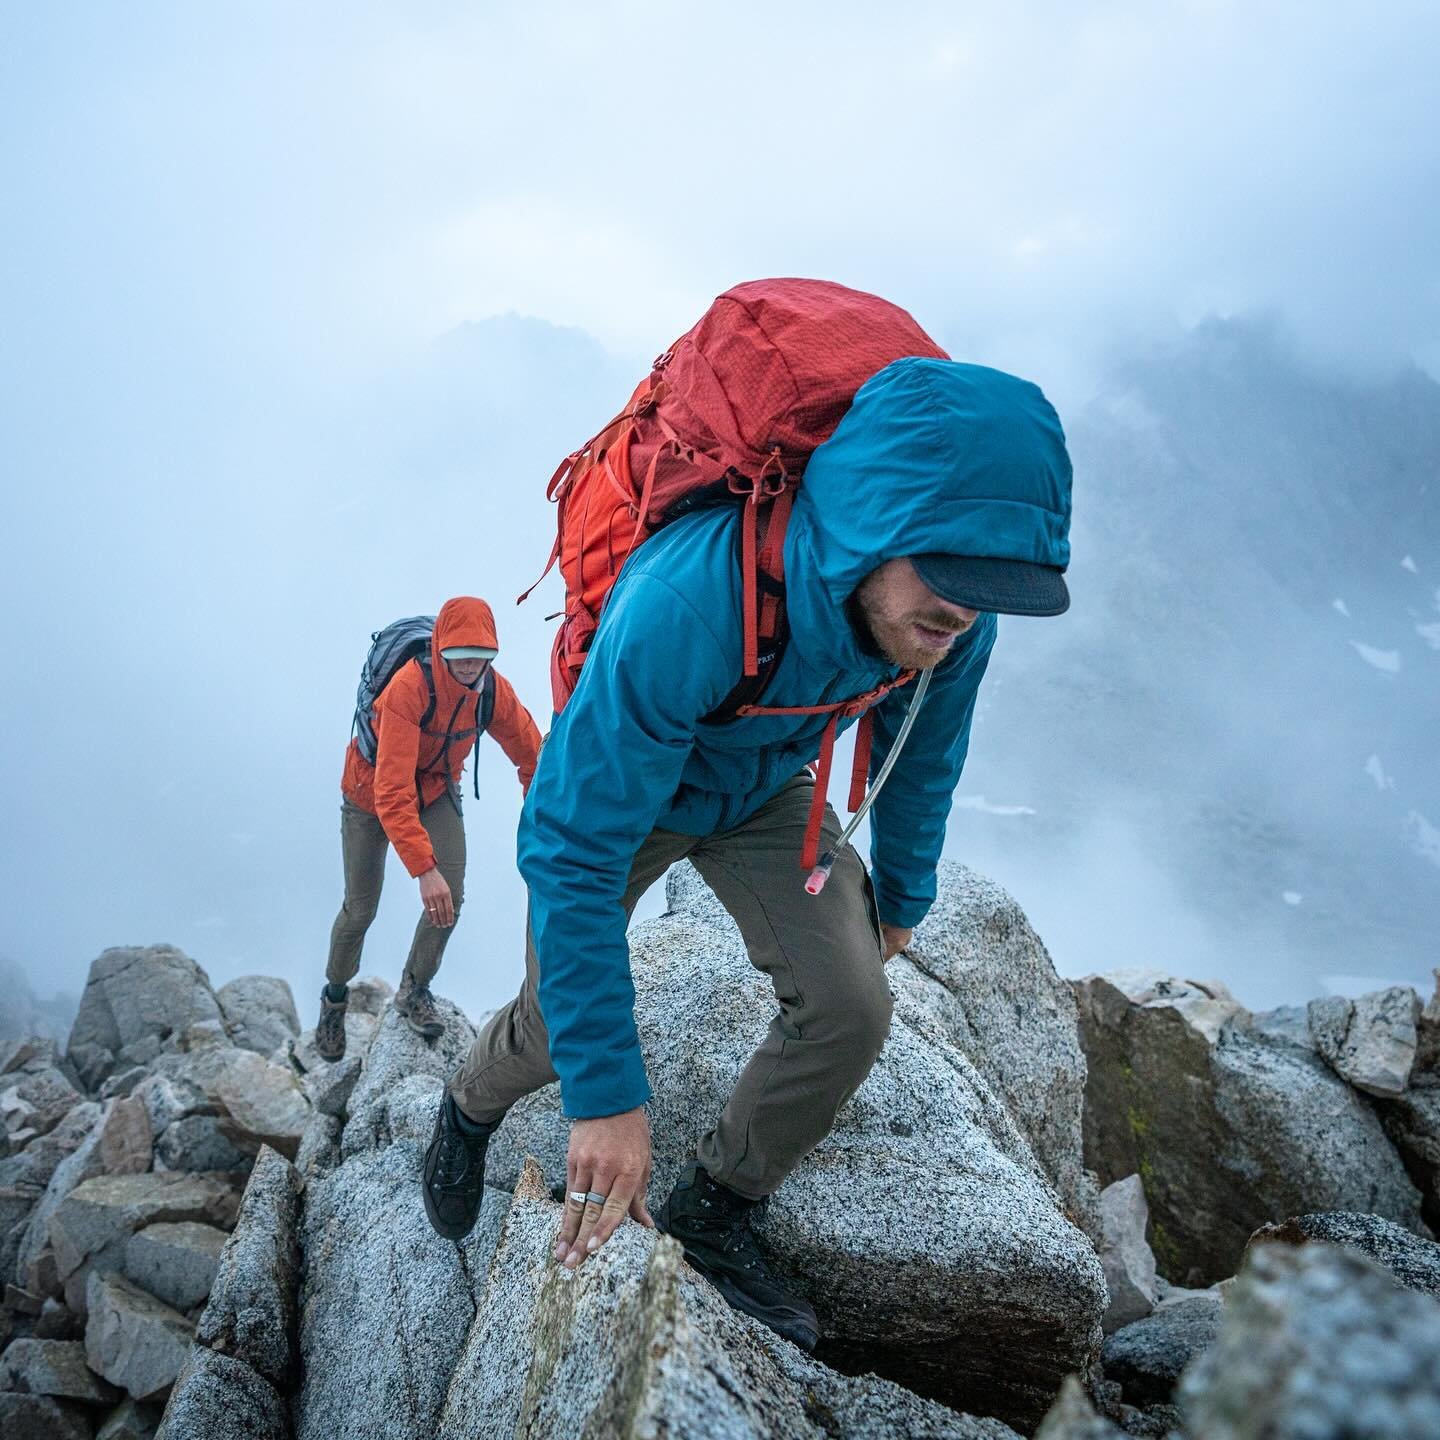 Some new work for @ospreypacks. Last summer they asked me to shoot images for the launch of their new Talon and Tempest packs. Part of their Pro Series, these packs are made for enthusiasts and experts in need of top-tier tech and materials for prope